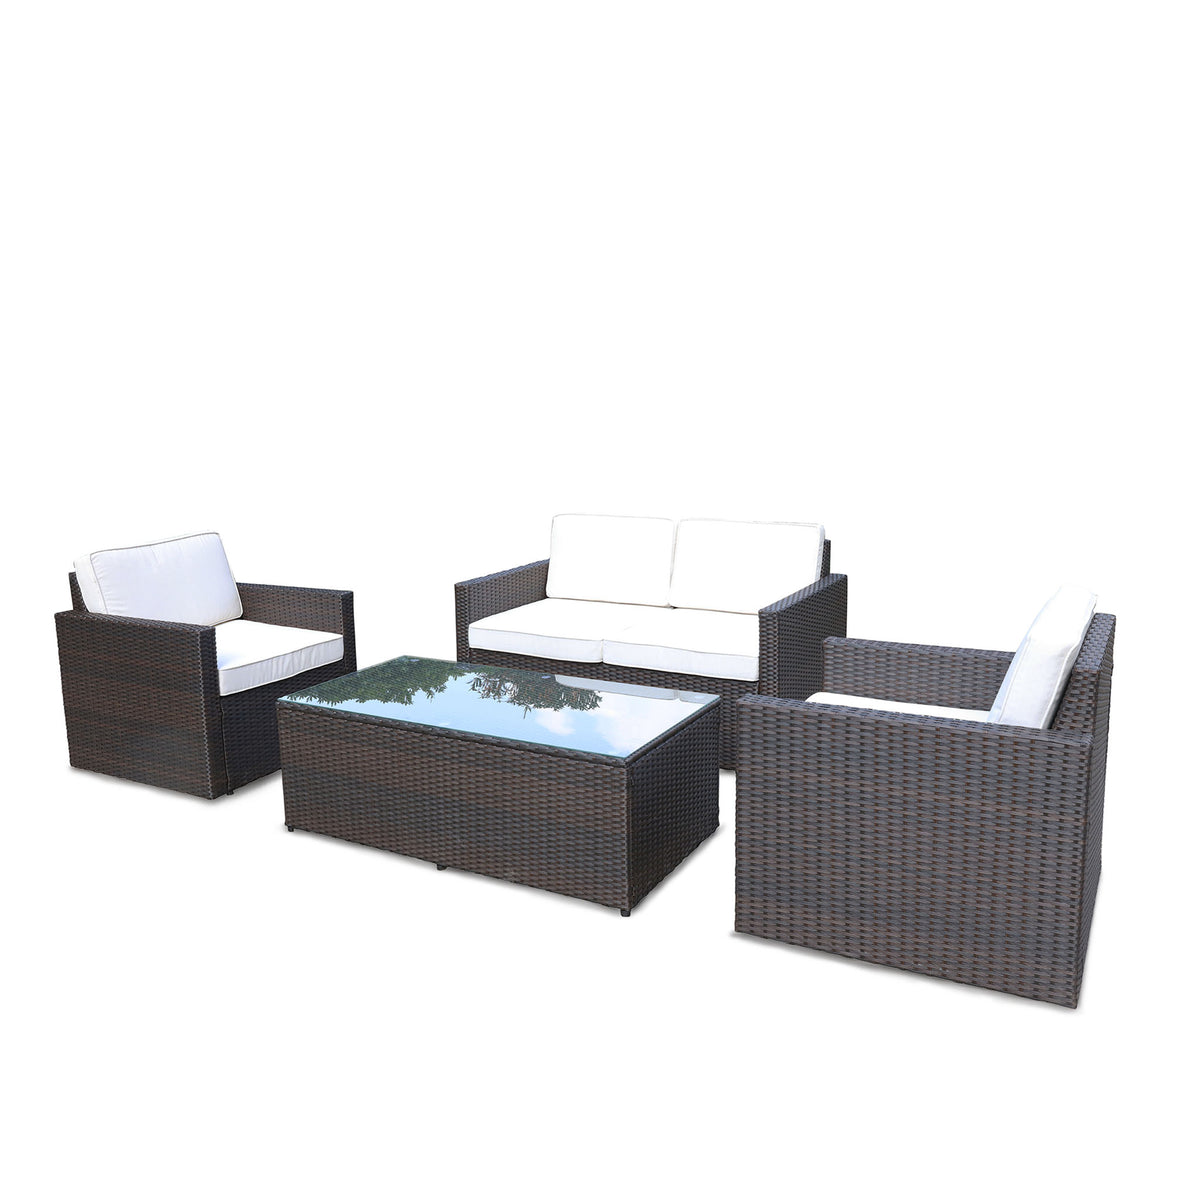 Berlin Brown Rattan 4 Seater Sofa Lounge Set with Coffee Table from Roseland Home Furniture